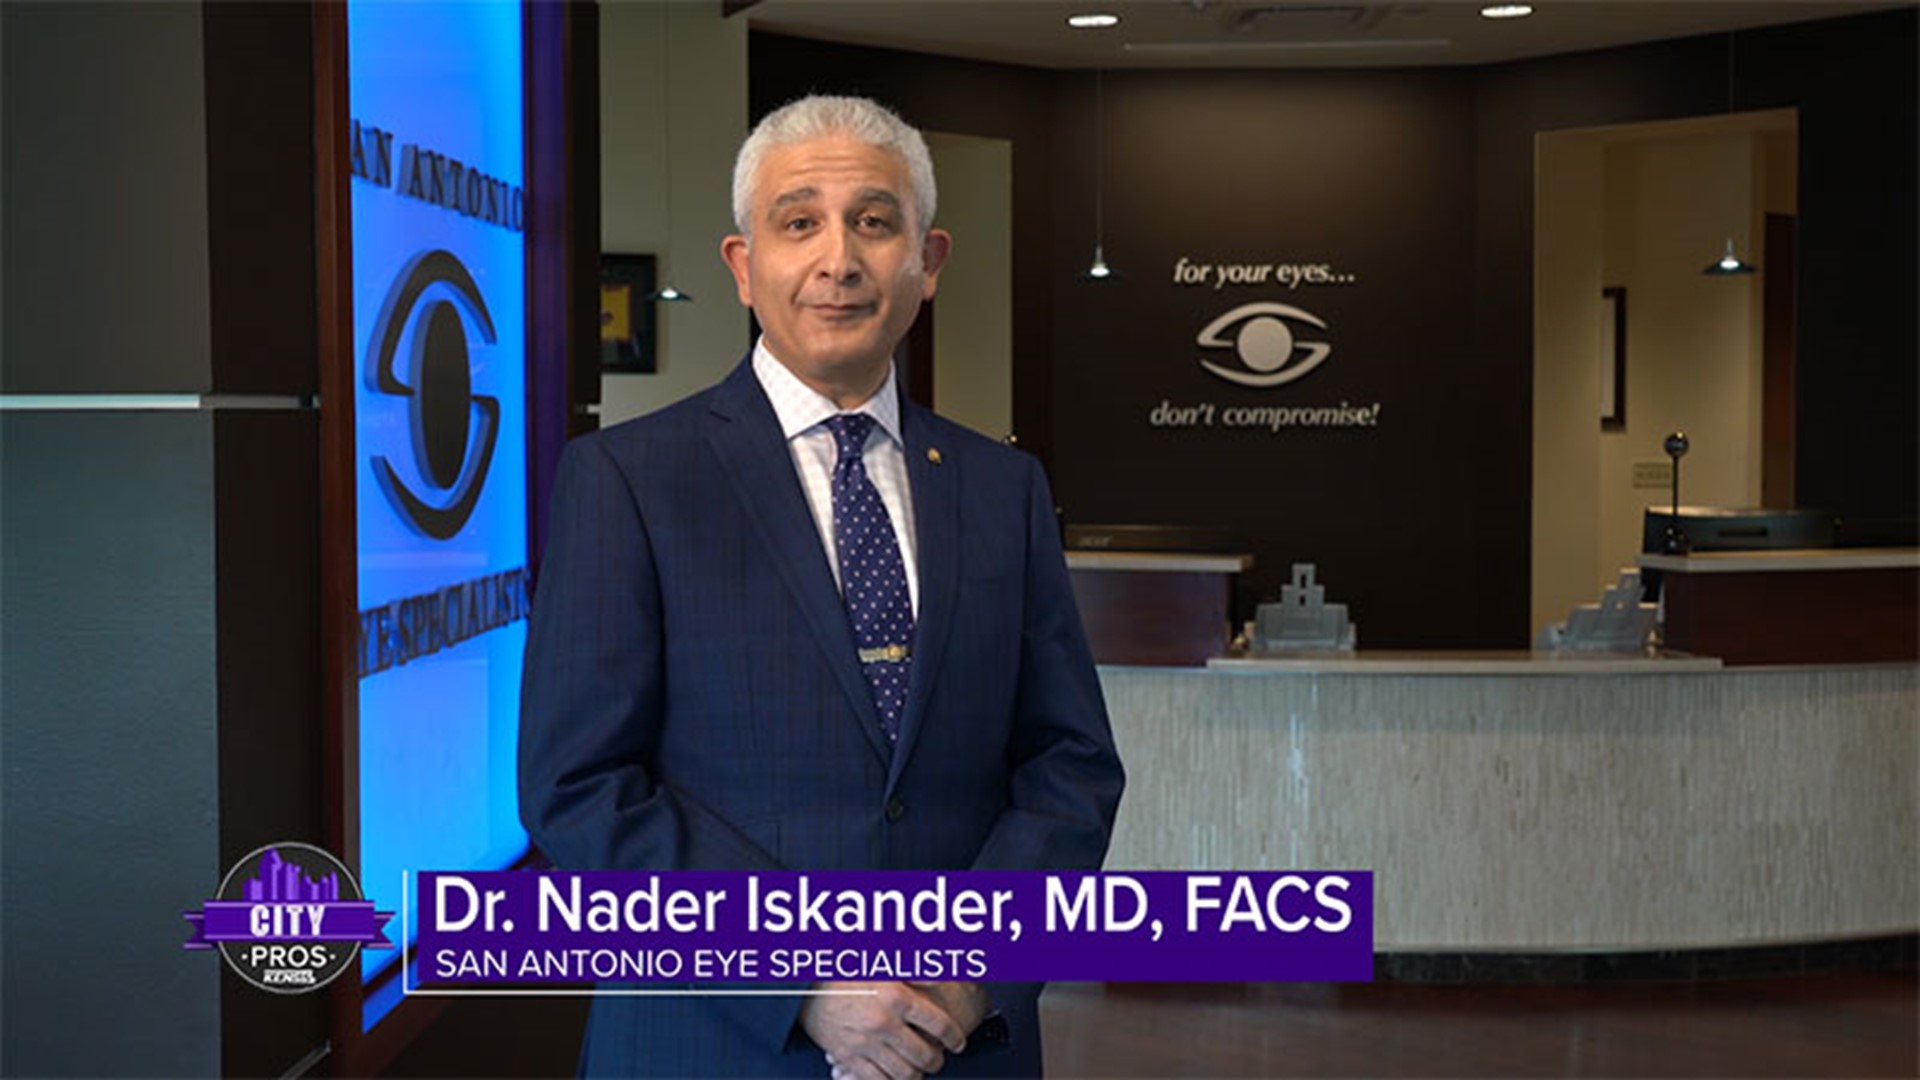 San Antonio Eye Specialists seeks to treat nearsightedness, farsightedness and astigmatism so that patients don't need glasses or contacts.